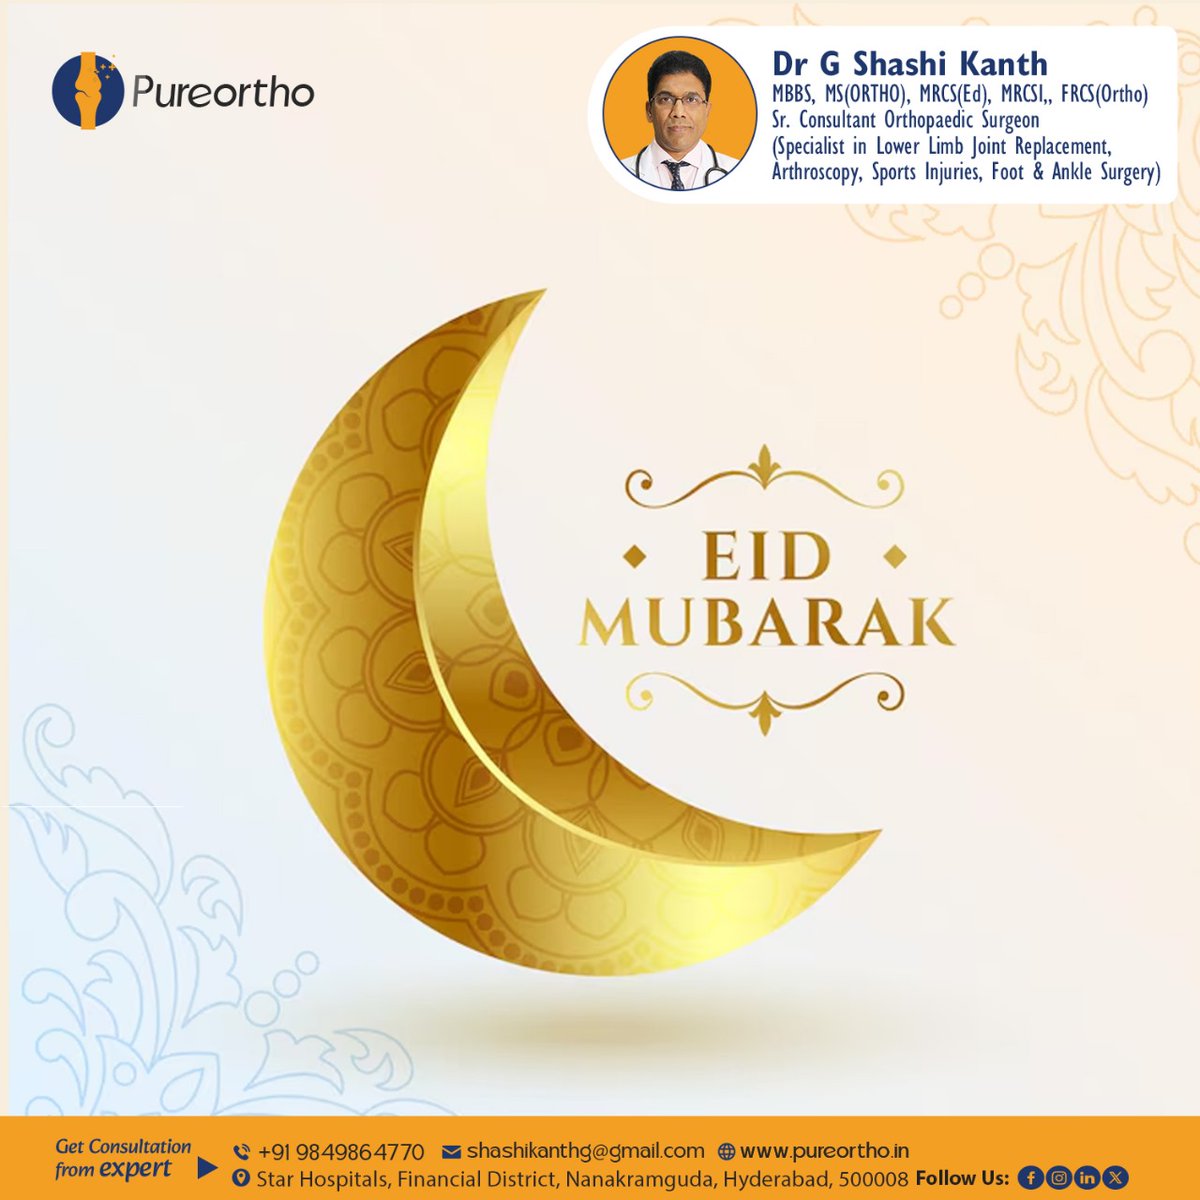 🌙💫 May your Eid be filled with happiness, peace, and good health. Let's cherish this special day with loved ones and spread joy all around! Eid Mubarak

#pureortho #pureorthocentre #drgshashikanth #OrthoCare #OrthopedicSpecialist #nanakramguda #Gachibowli #financialdistrict